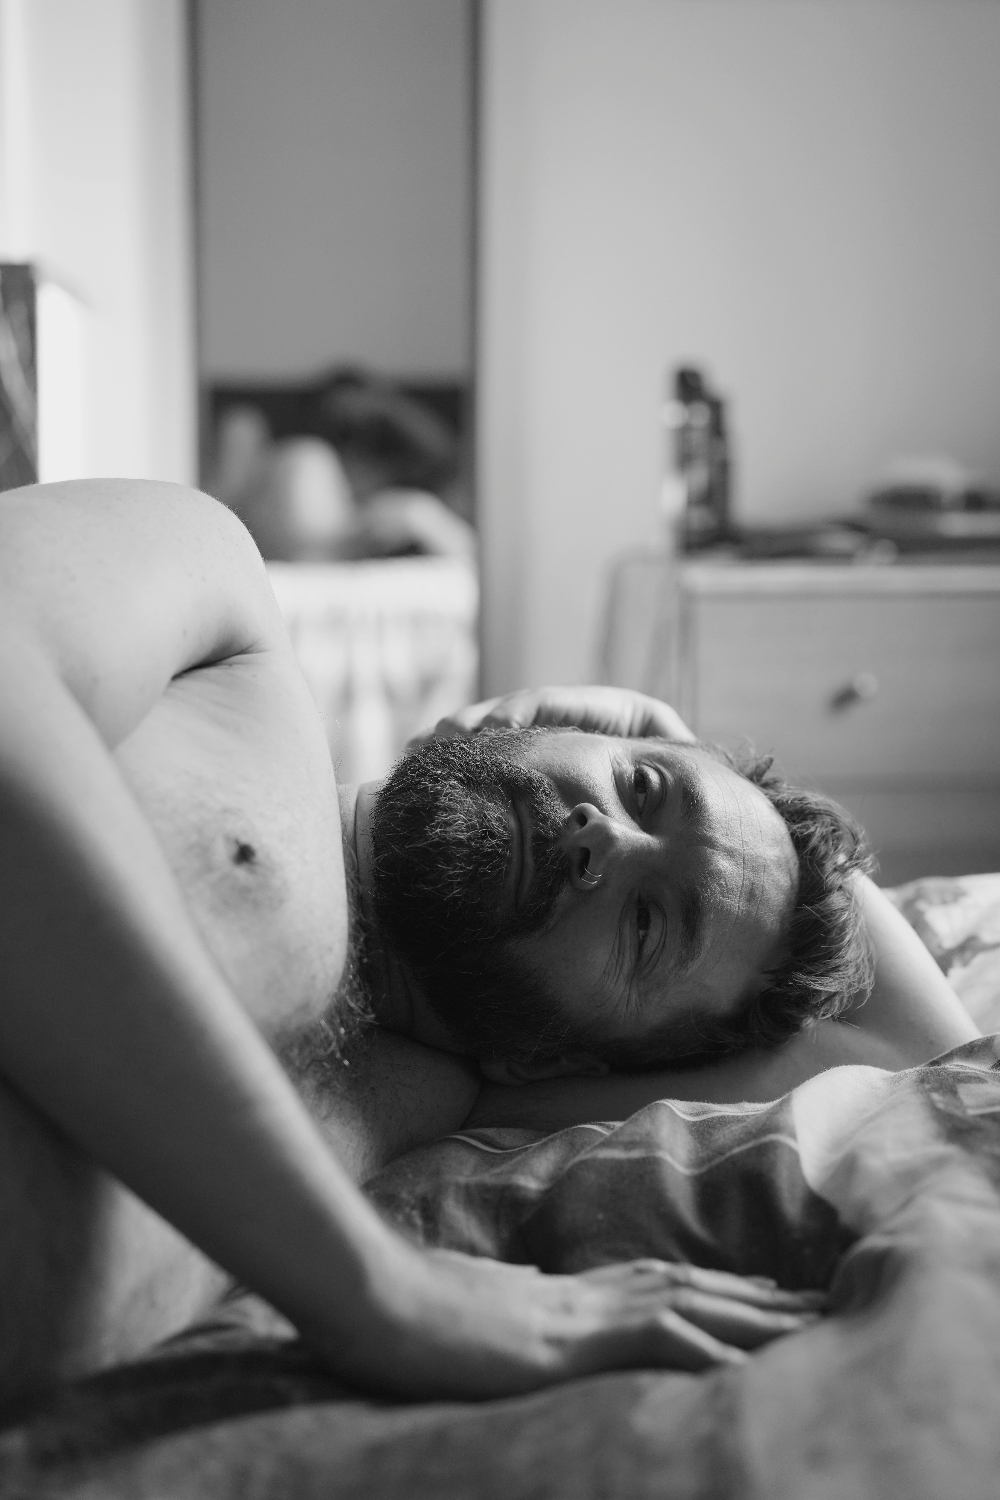 The intimate bodyworker – Kevin from the U.K.